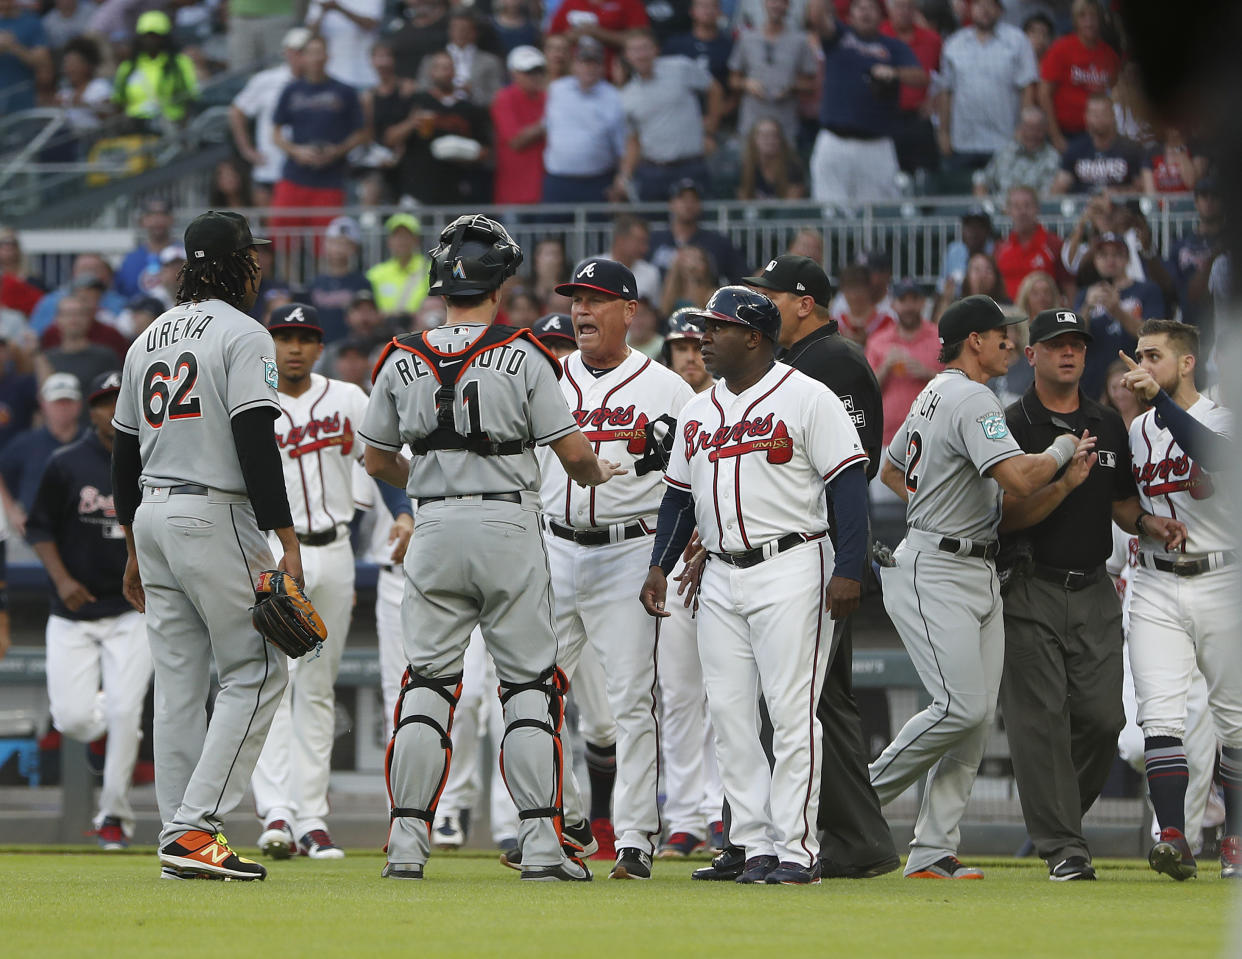 Ronald Acuña was hit by José Ureña to start Wednesday’s game. (AP Photo/John Bazemore)